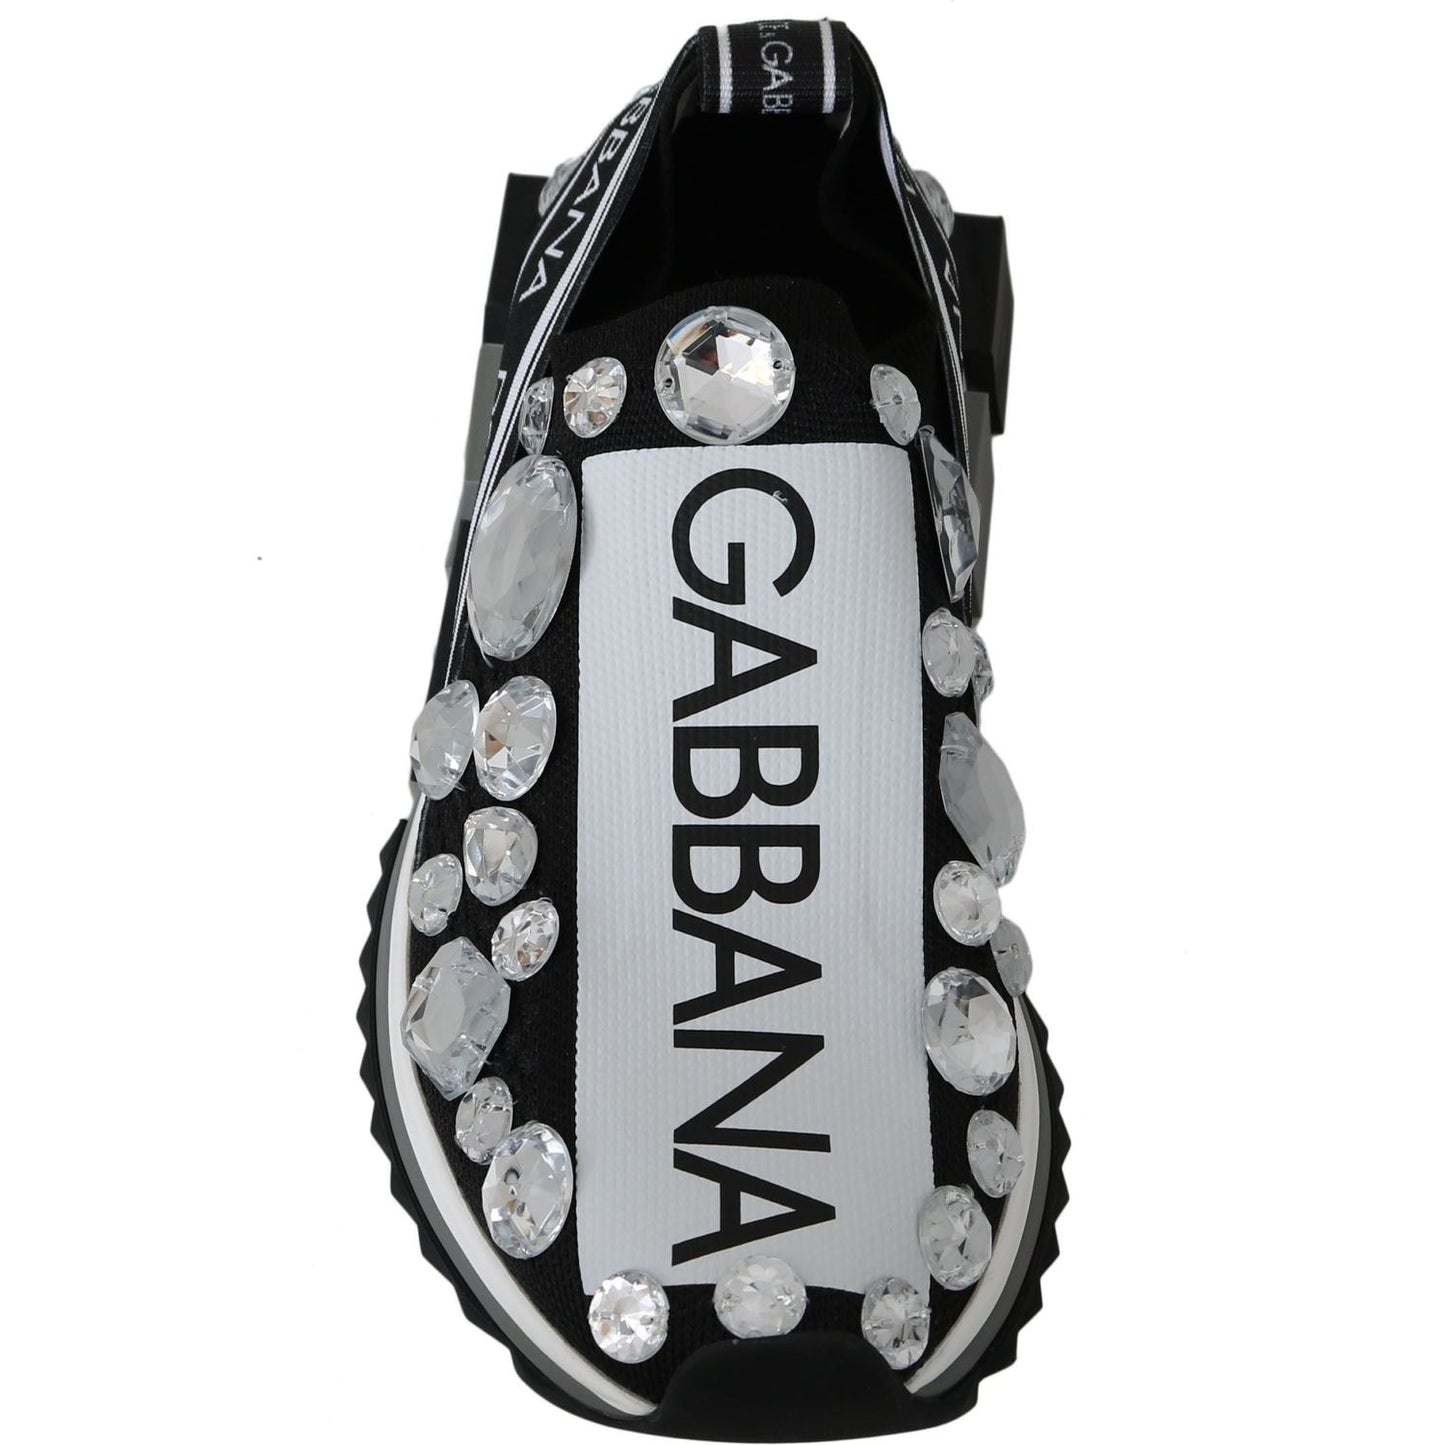 Dolce & Gabbana Chic Monochrome Crystal Studded Sneakers black-white-crystal-womens-sneakers-shoes